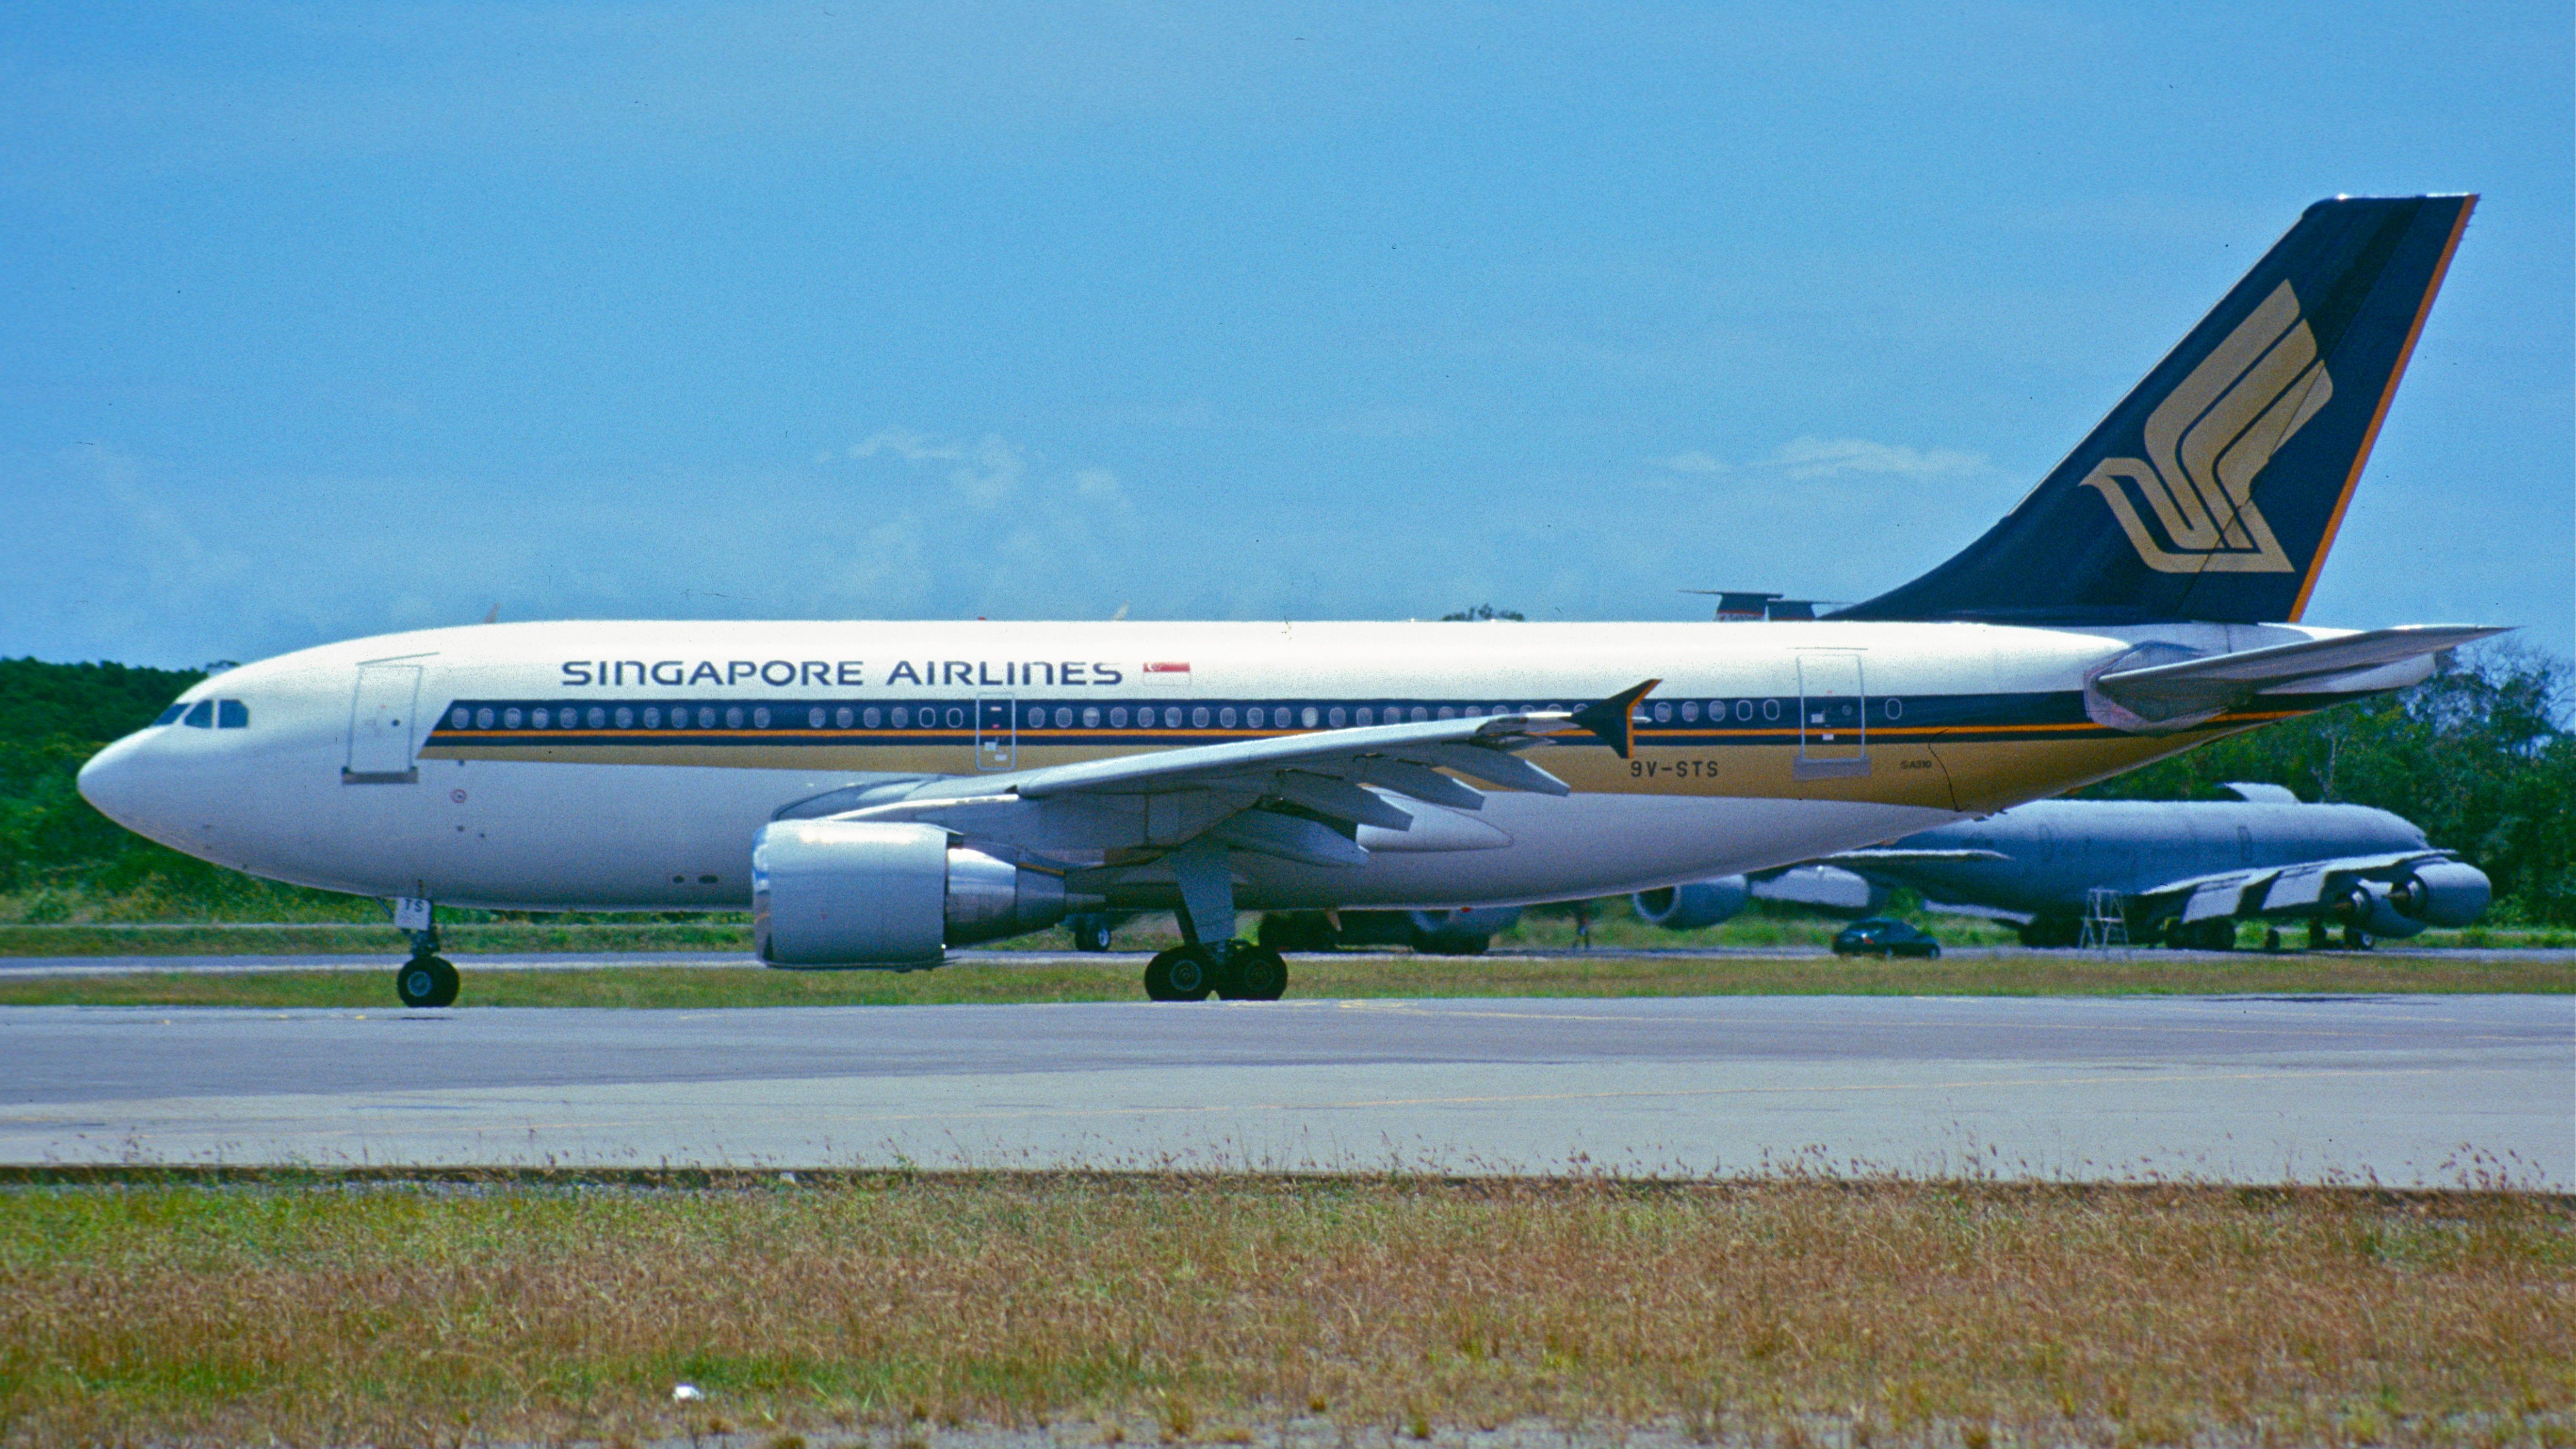 A Singapore Airlines Airbus A310 on an airport apron.